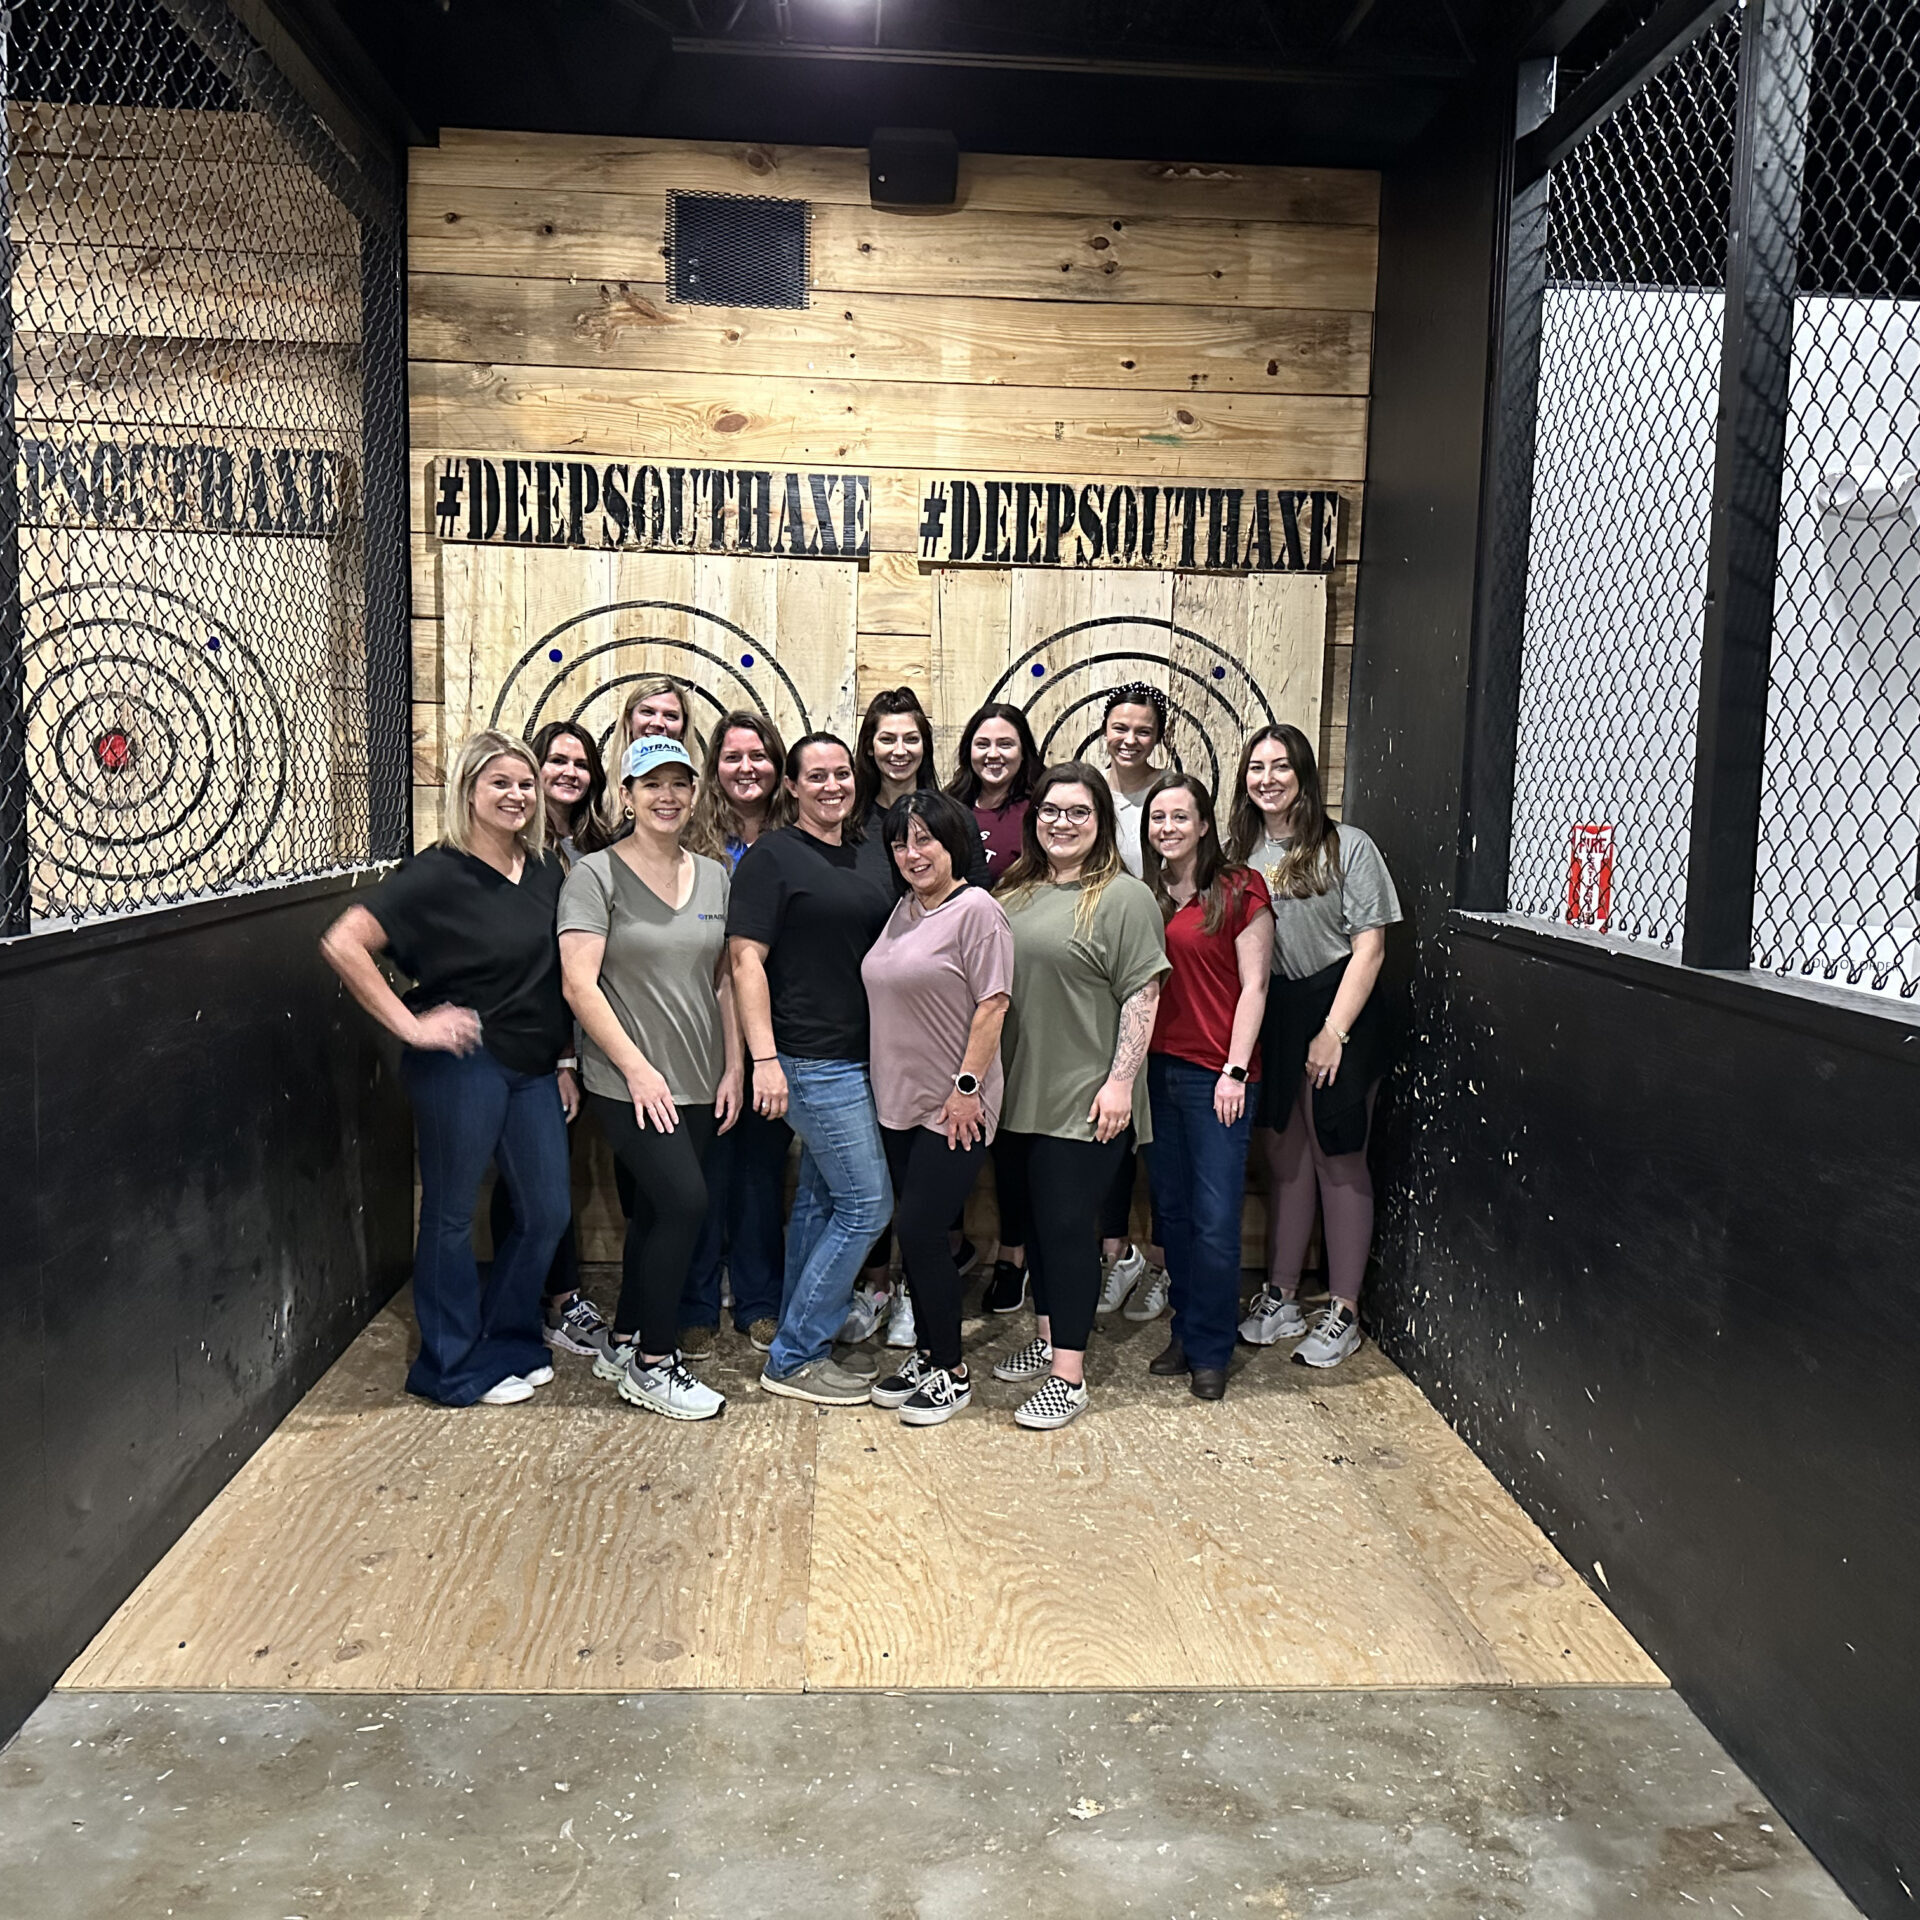 A group of Trade employees at a team outing event doing axe throwing